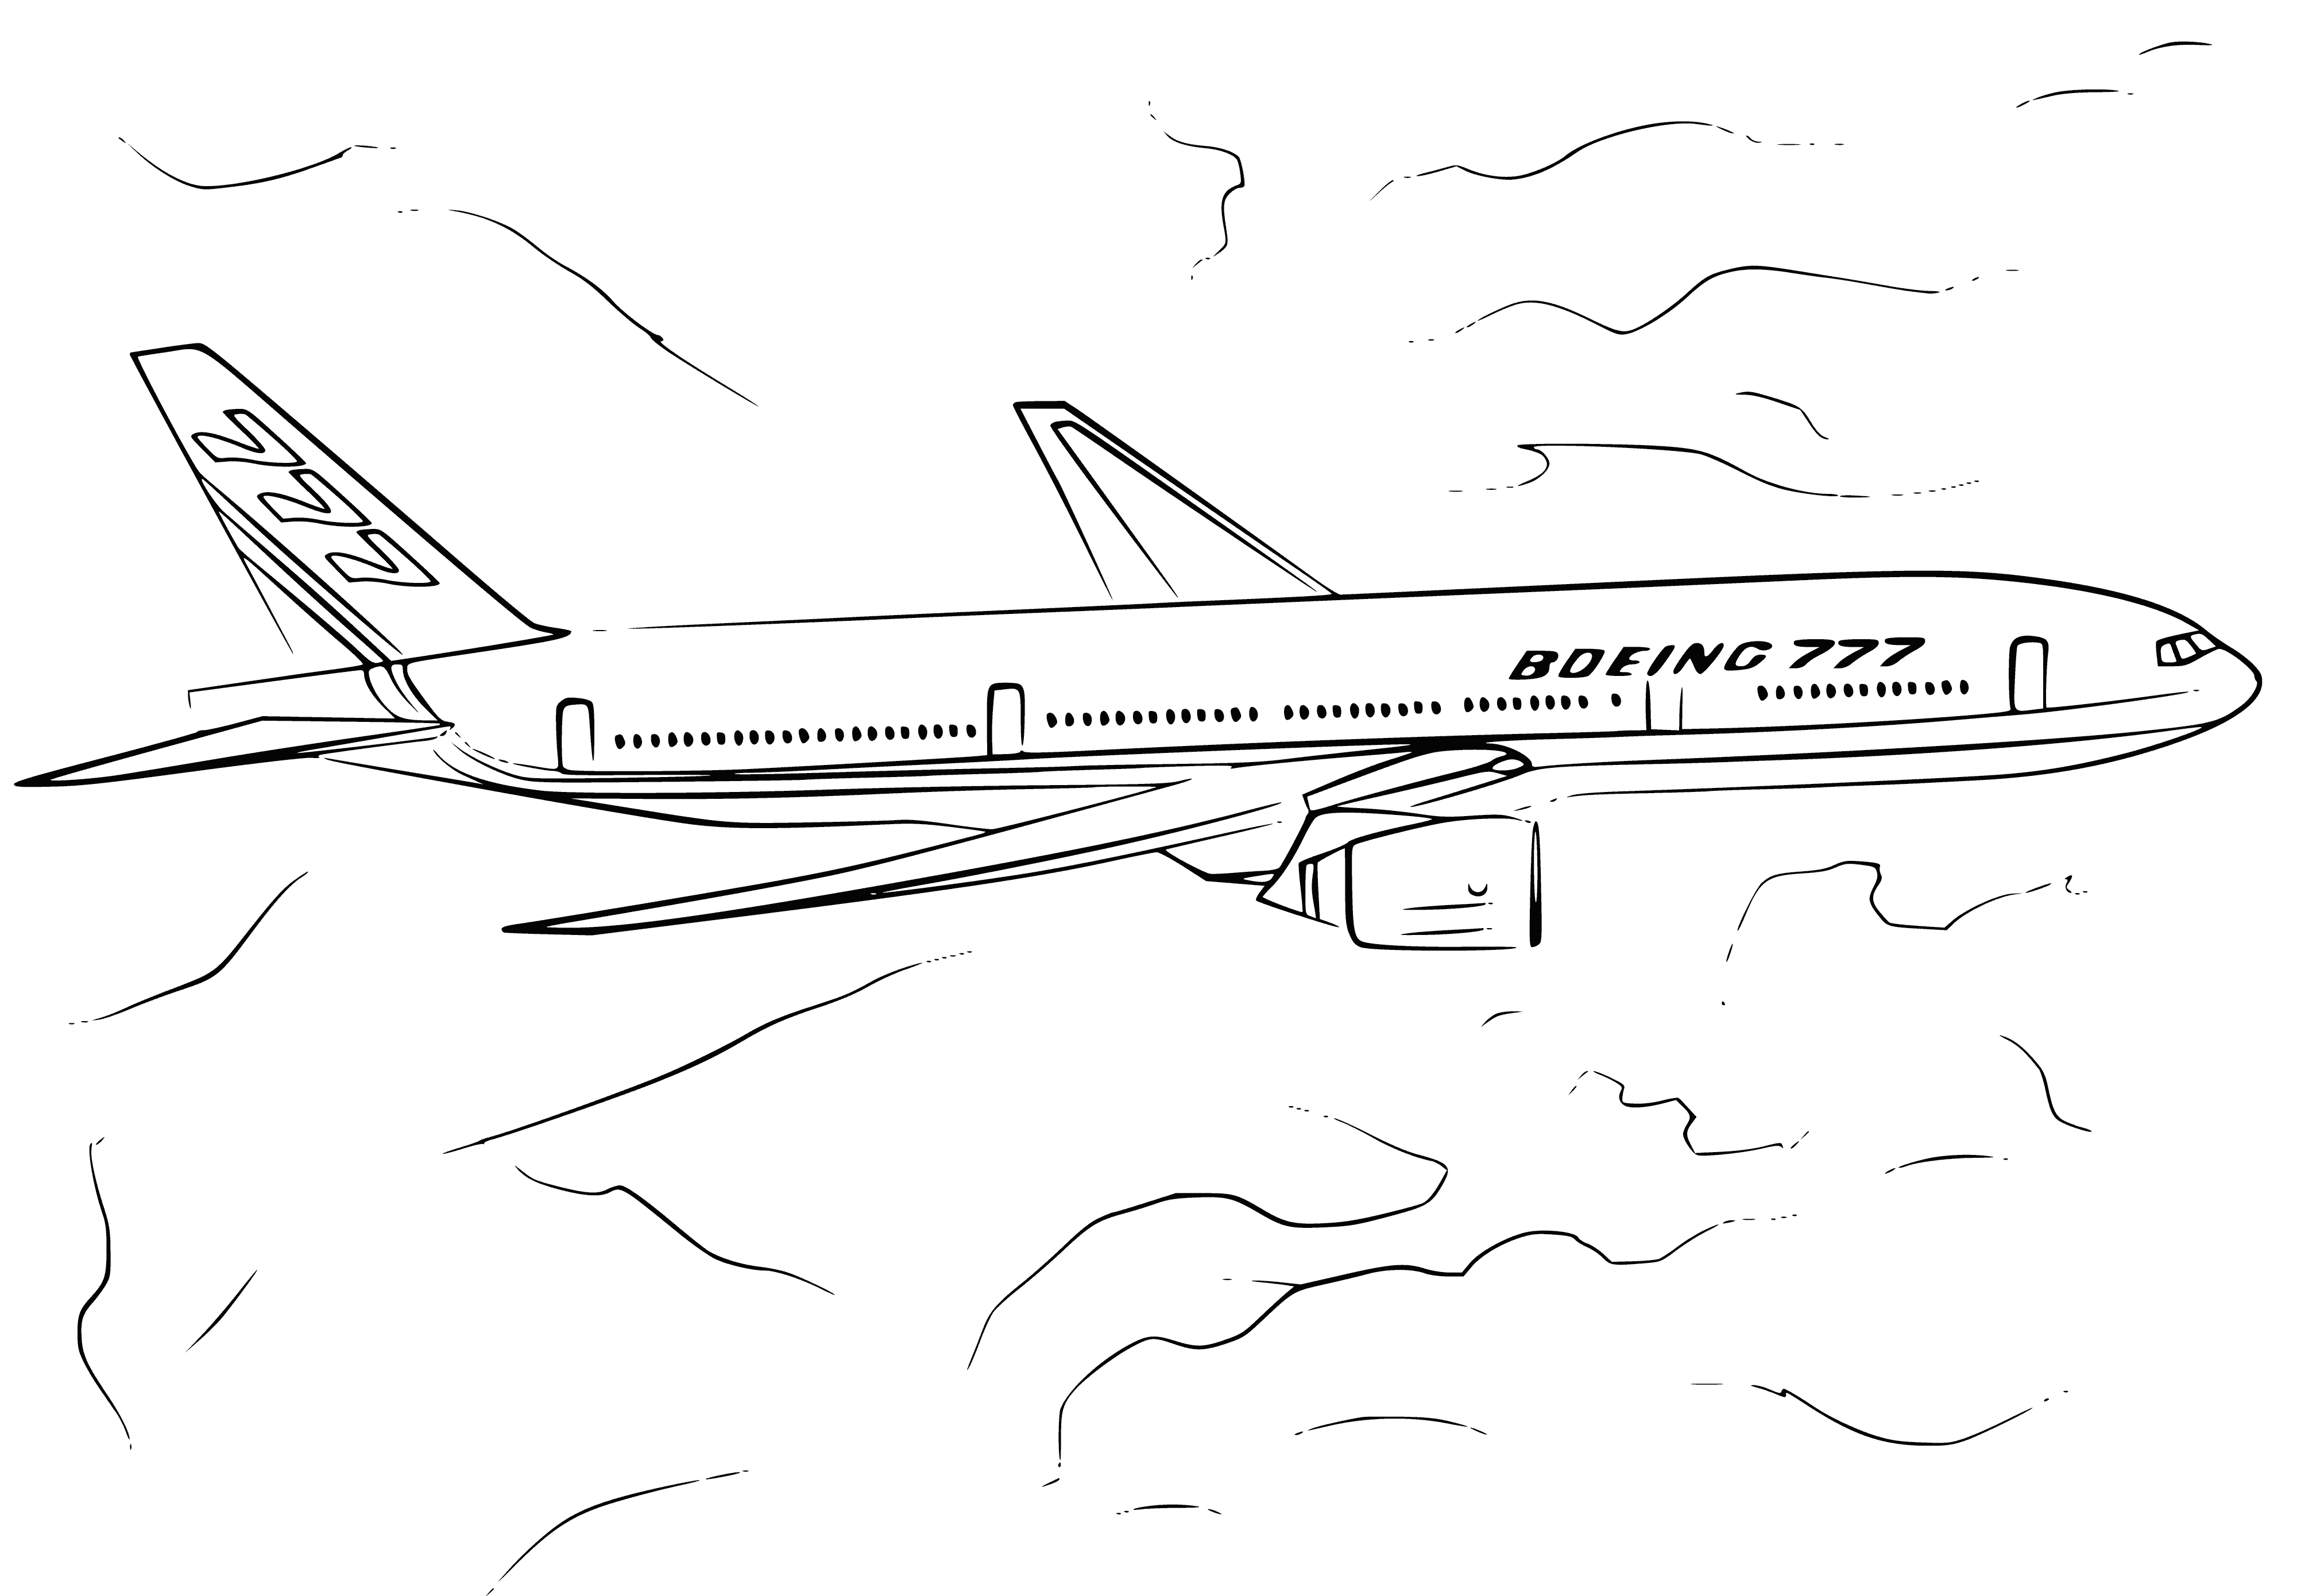 coloring page: A Boeing 777 soars in the sky with two engines, wide wings, and an upraised tail glittering in the sun.